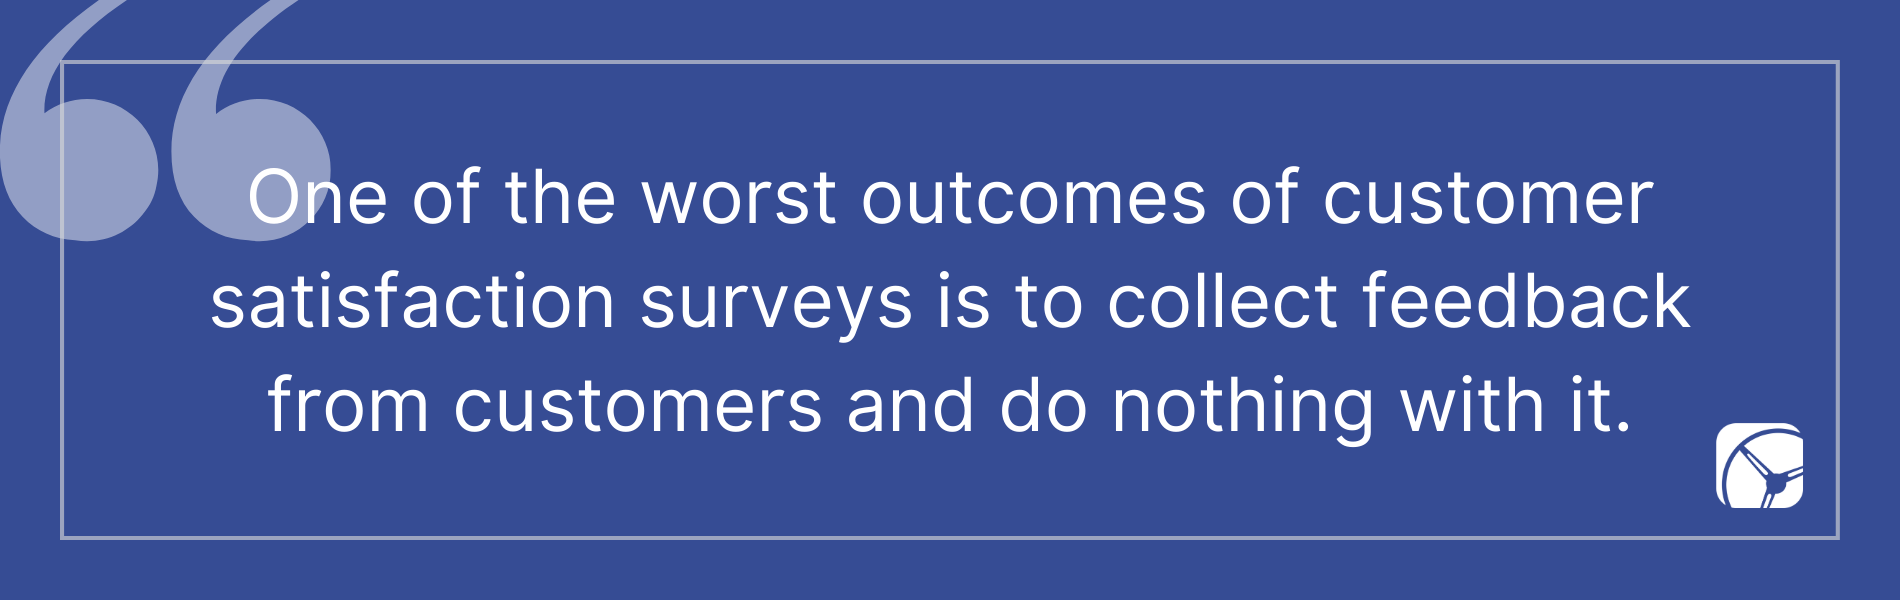 One of the worst outcomes of customer satisfaction surveys is to collect feedback from customers and do nothing with it.